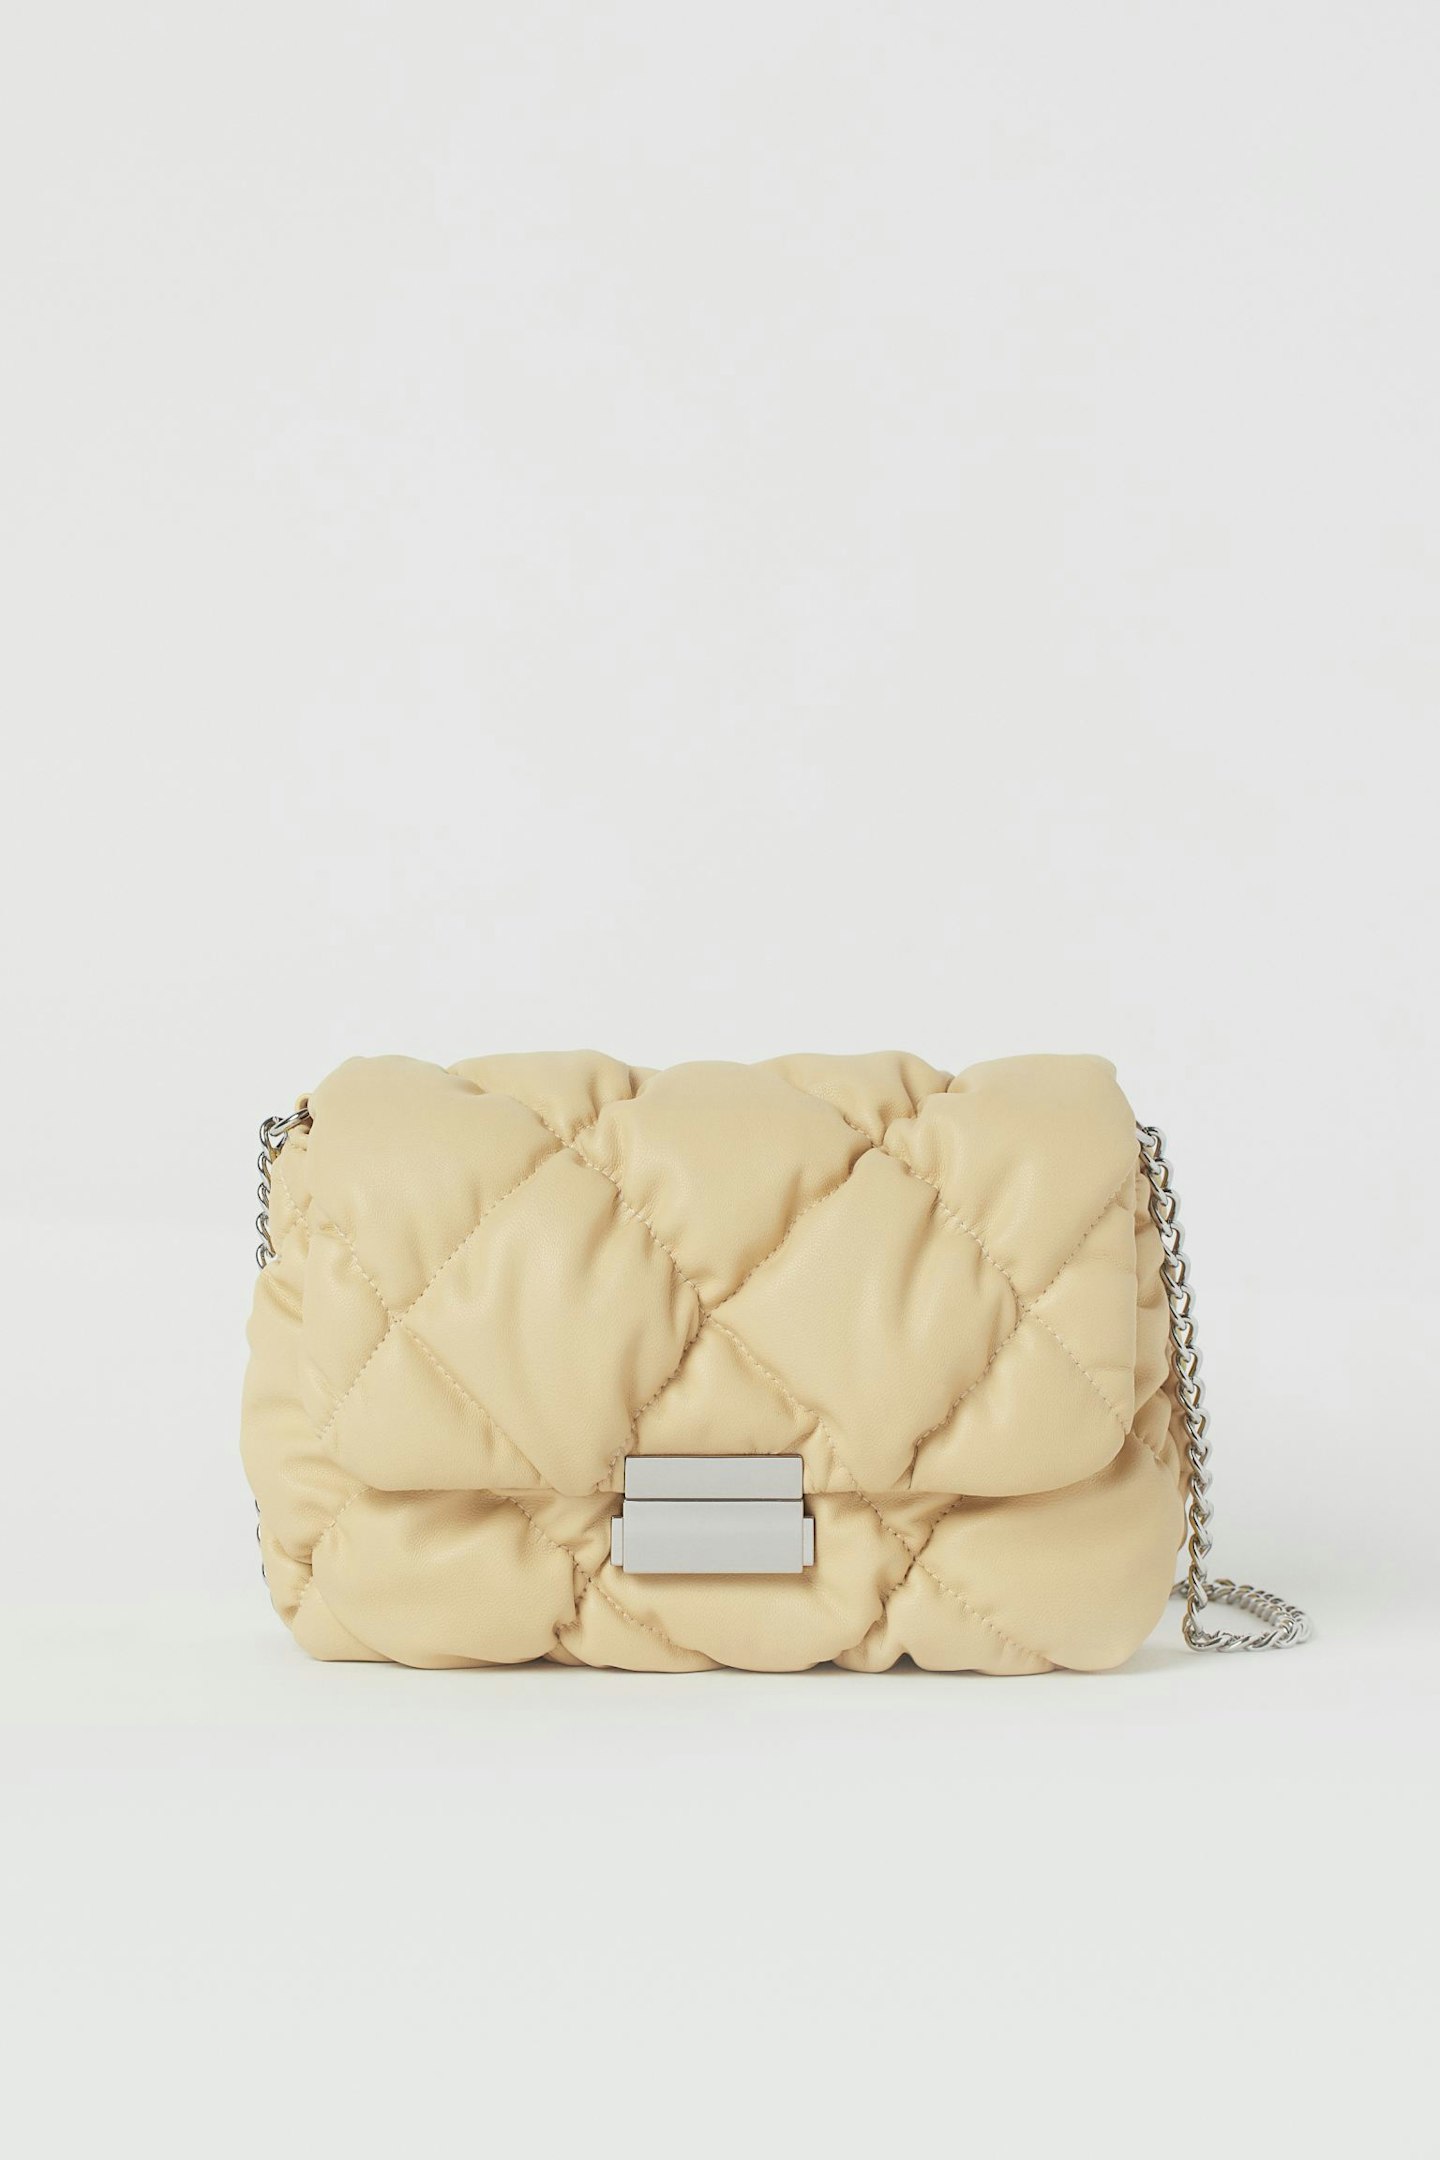 H&M Quilted Mini Bag